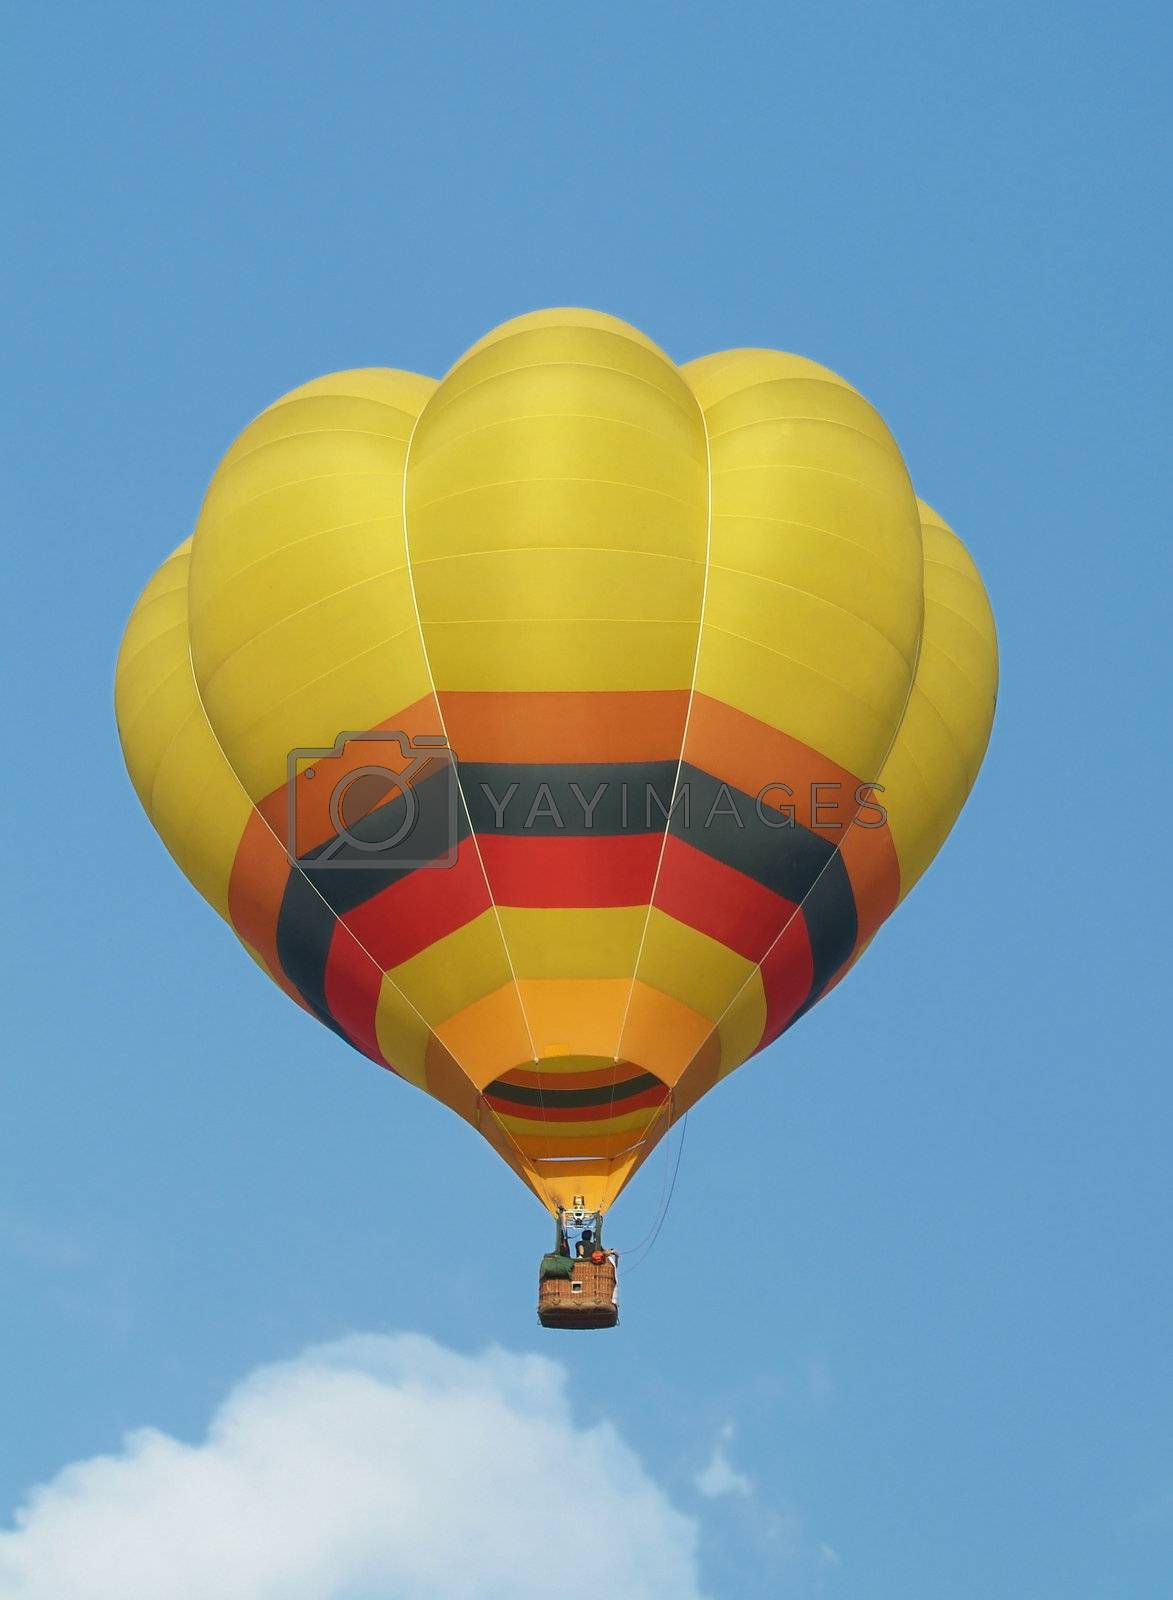 Royalty free image of Yellow hot-air balloon by epixx